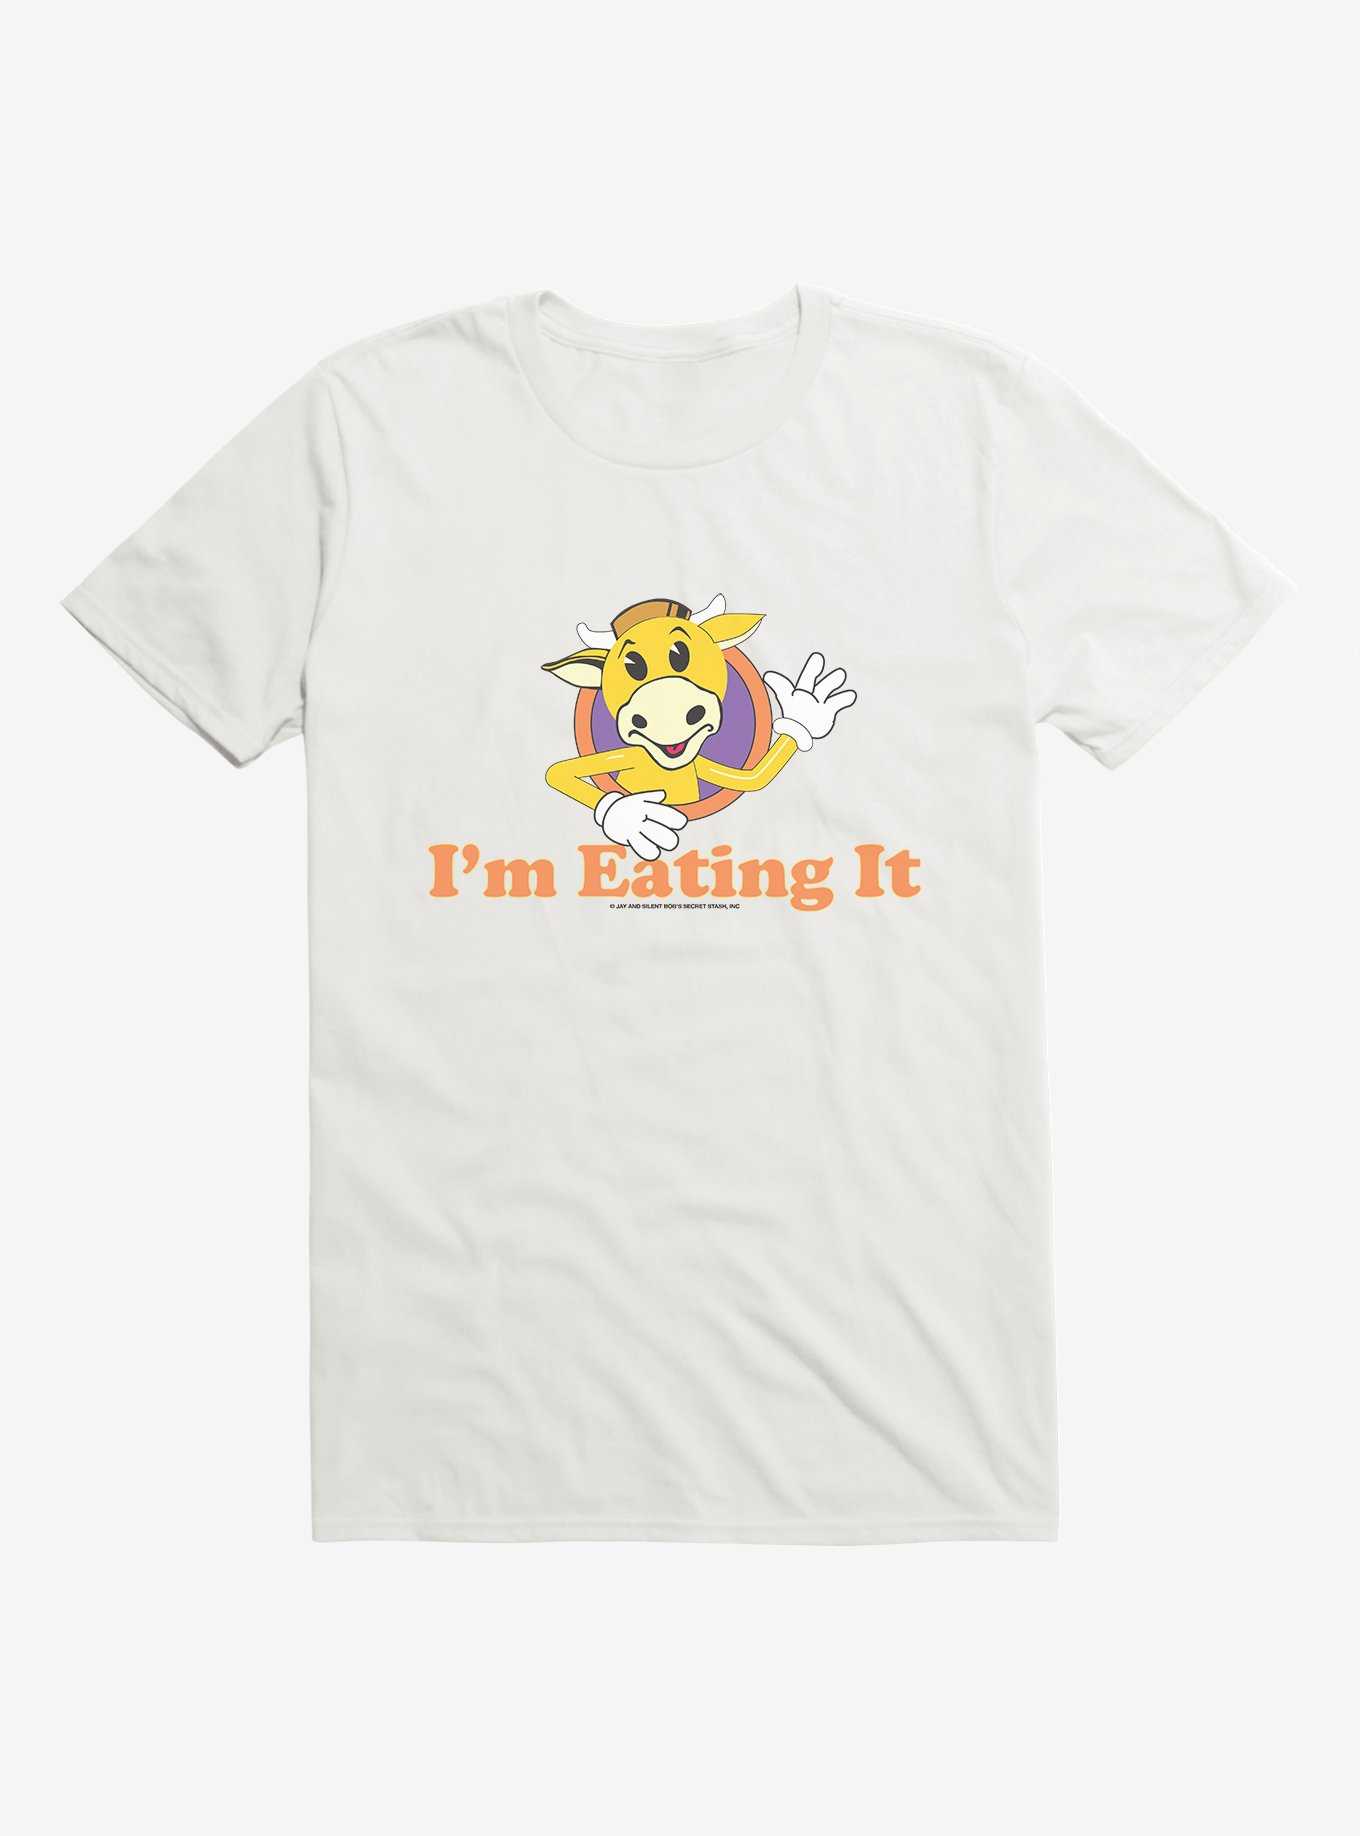 Jay And Silent Bob Reboot Mooby's I'm Eating It T-Shirt, WHITE, hi-res